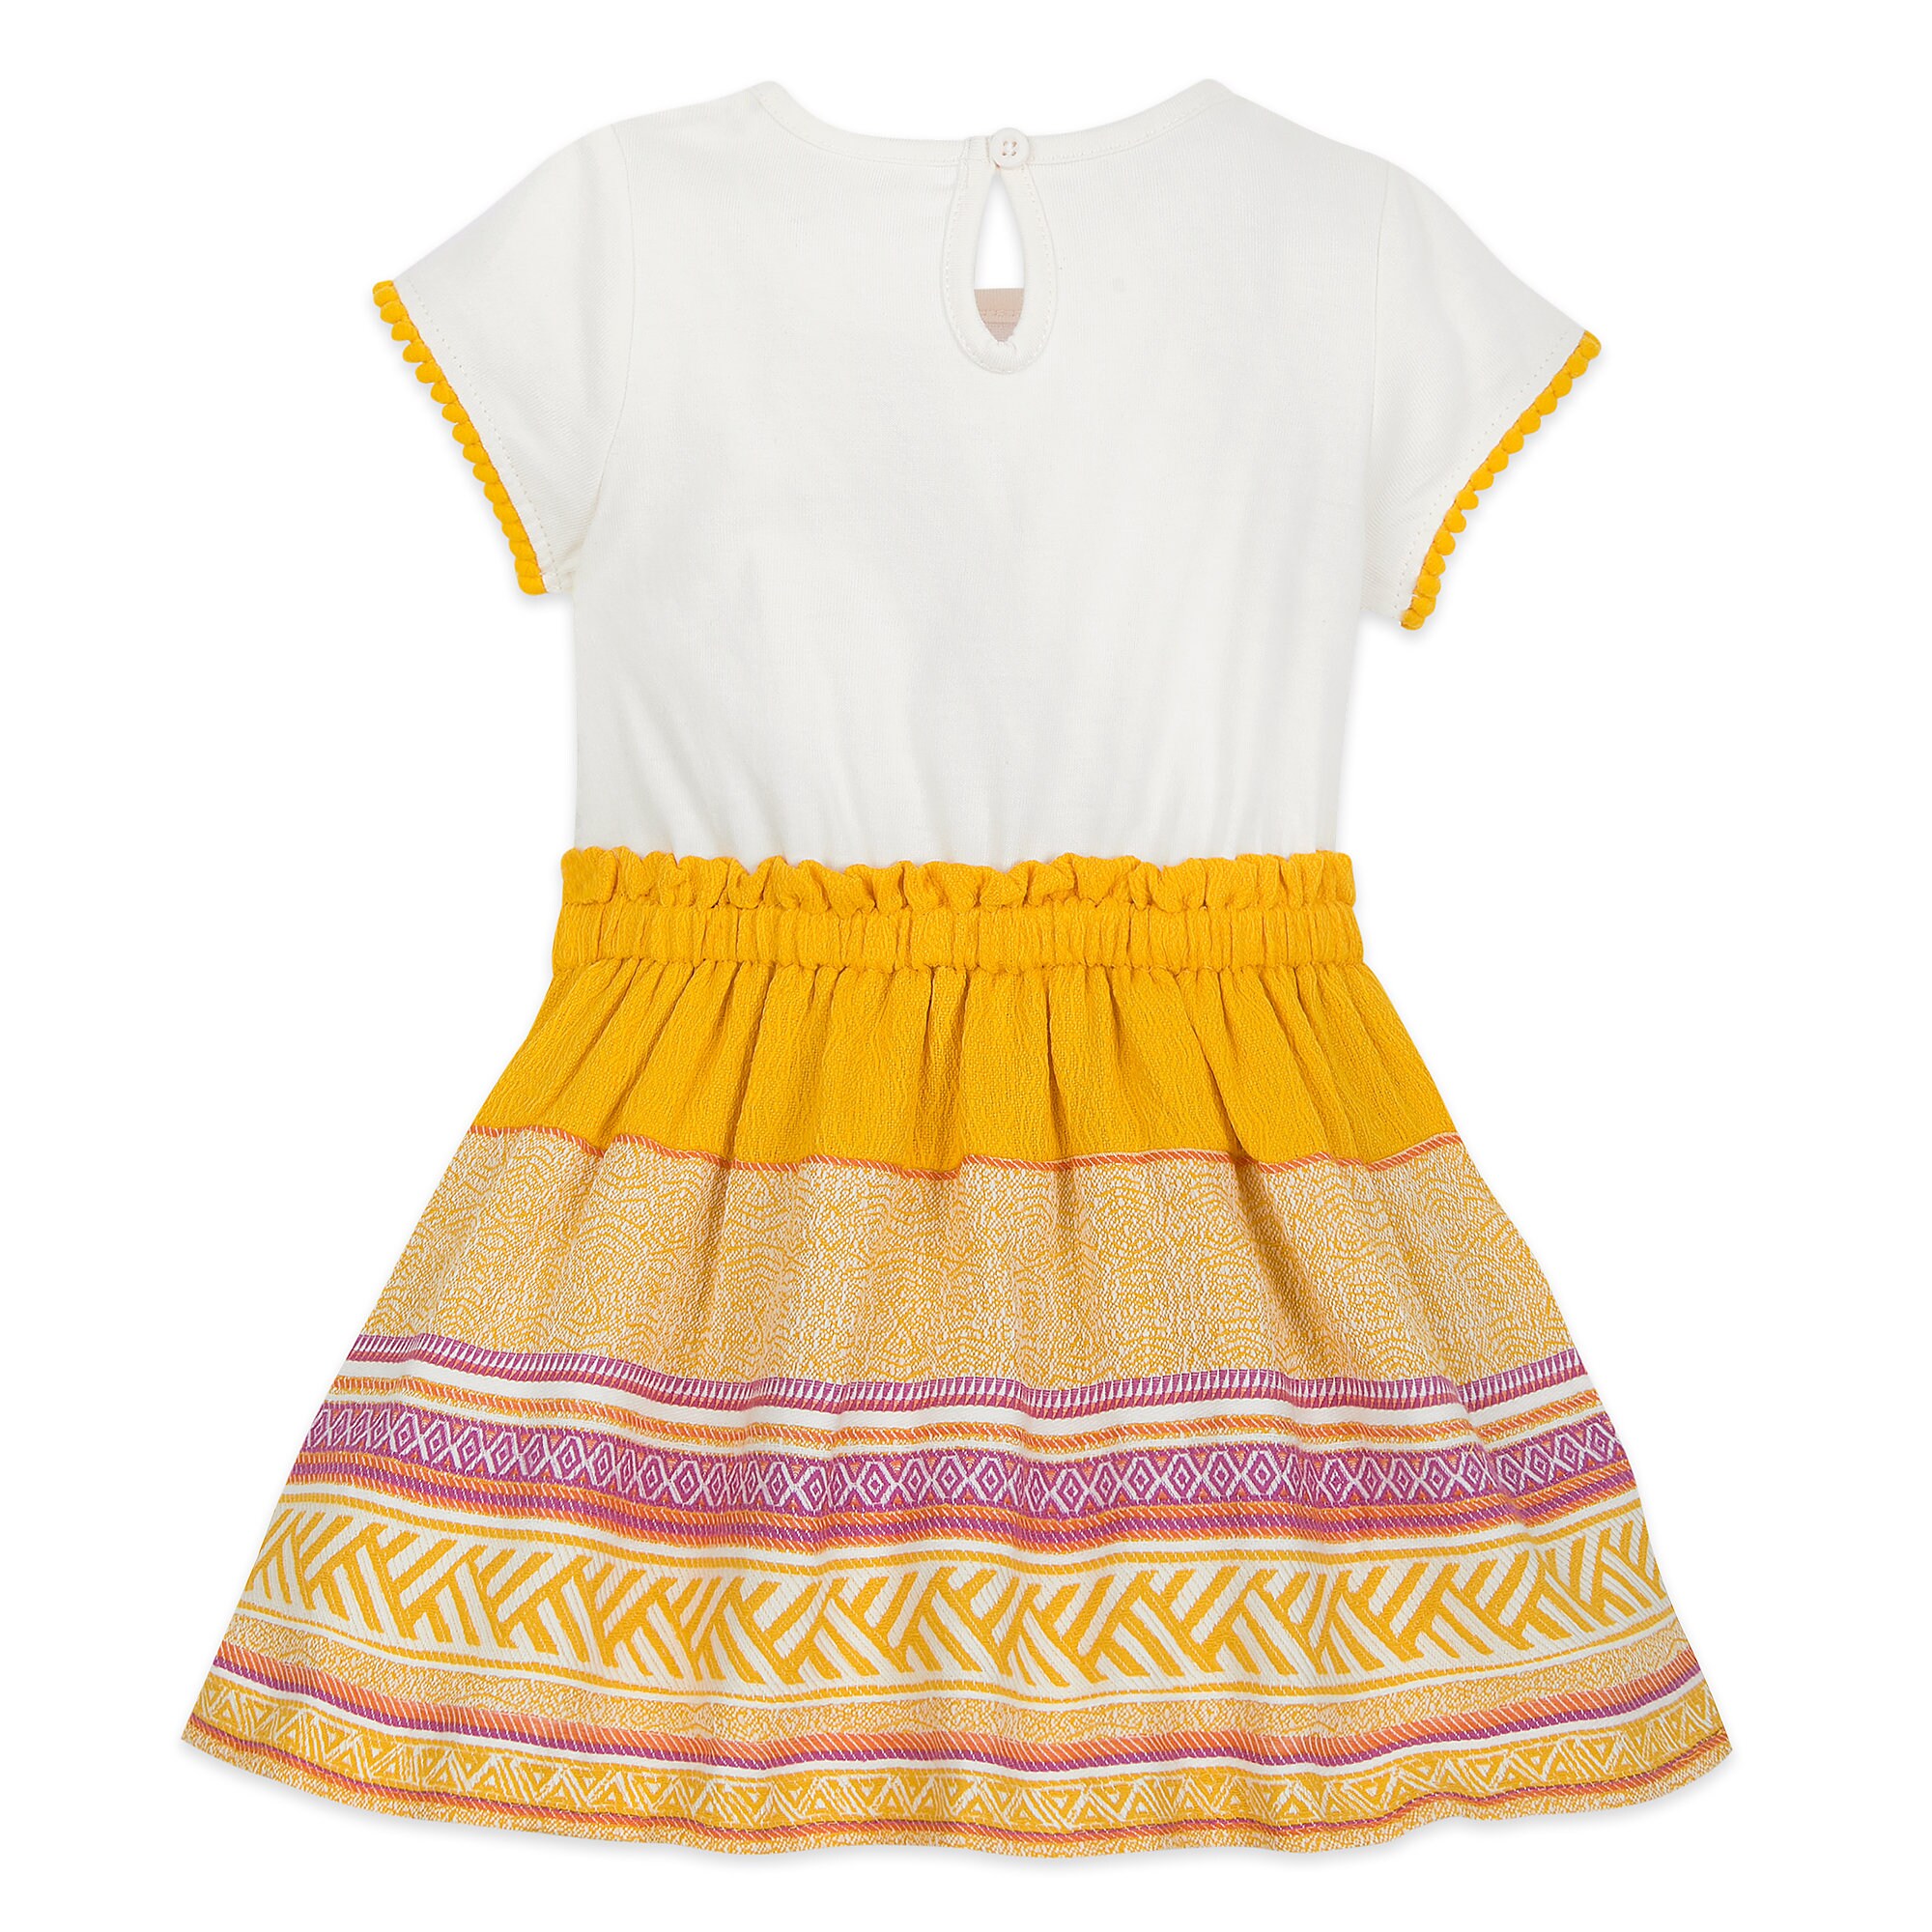 The Lion King Woven Skirt Dress for Baby